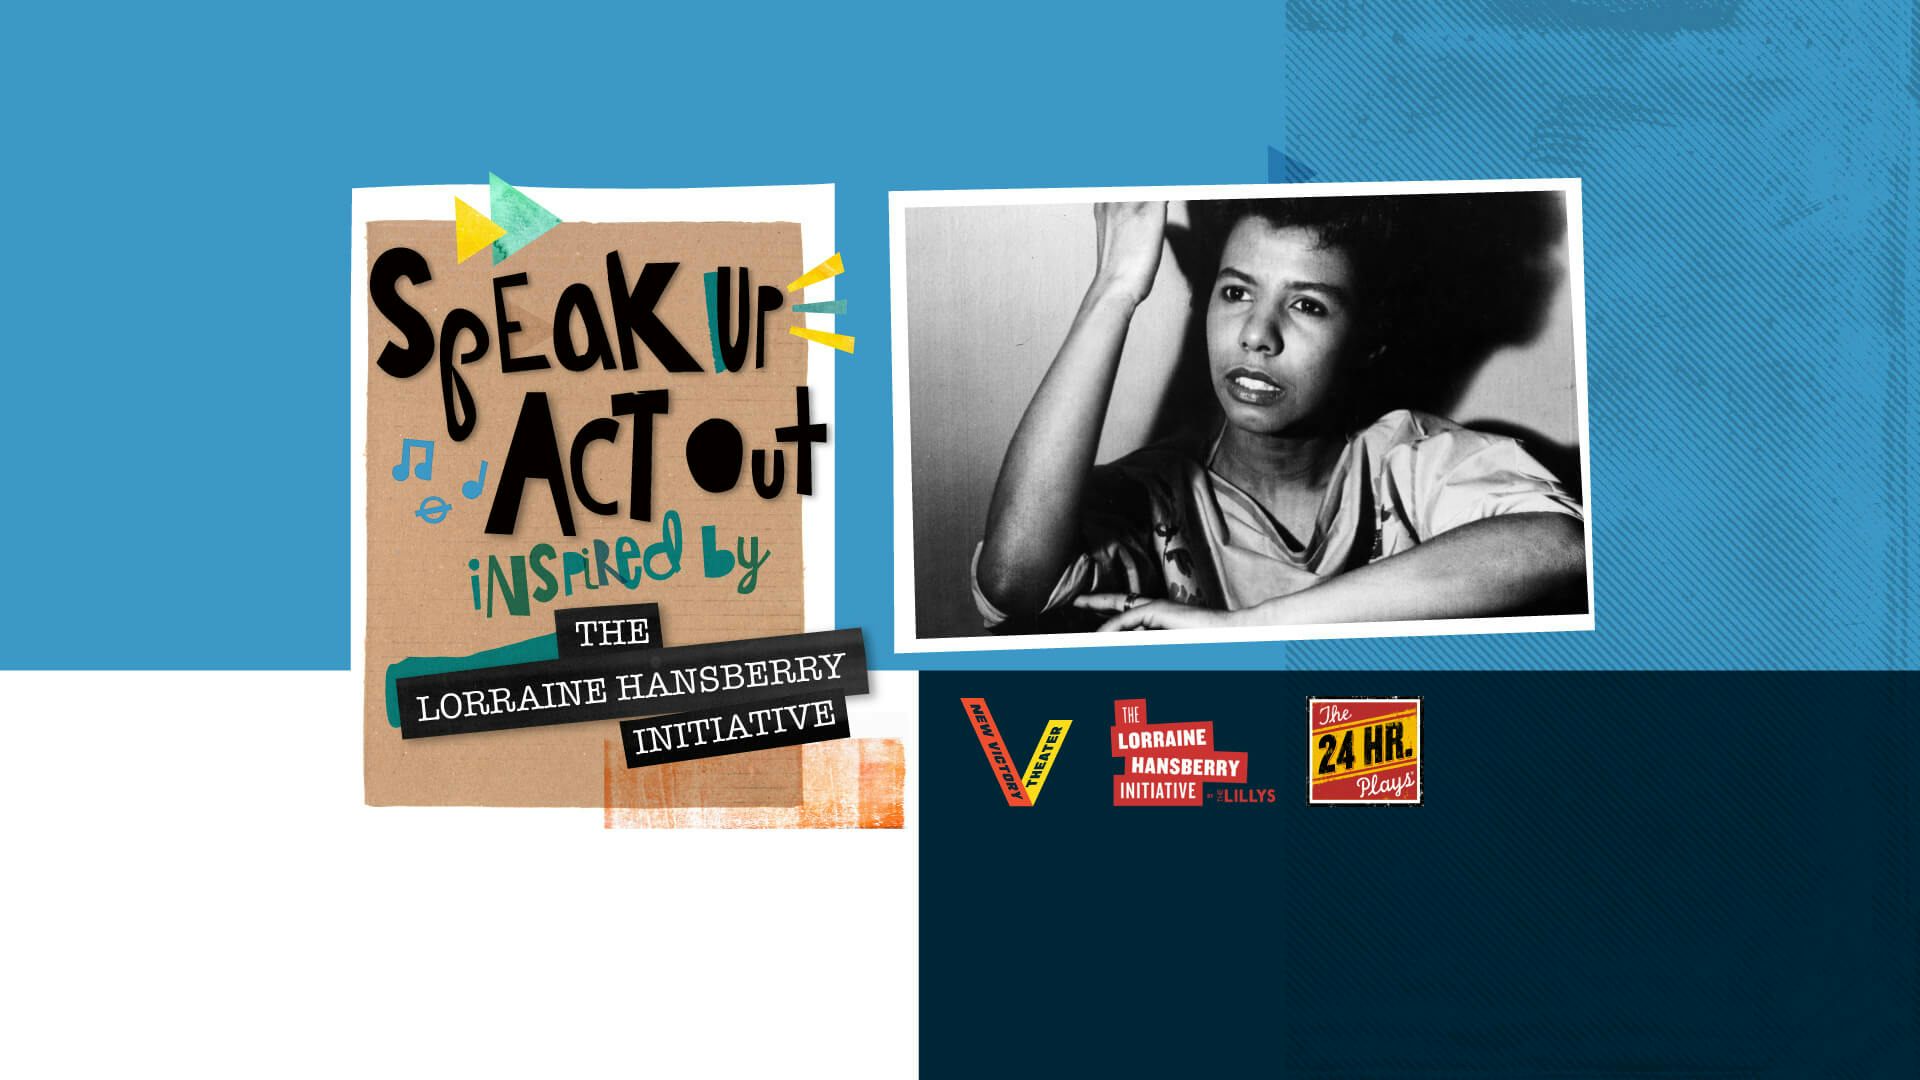 Graphic with text, Speak Up, Act Out: Inspired by The Lorraine Hansberry Initiative, with a portrait of Lorraine Hansberry